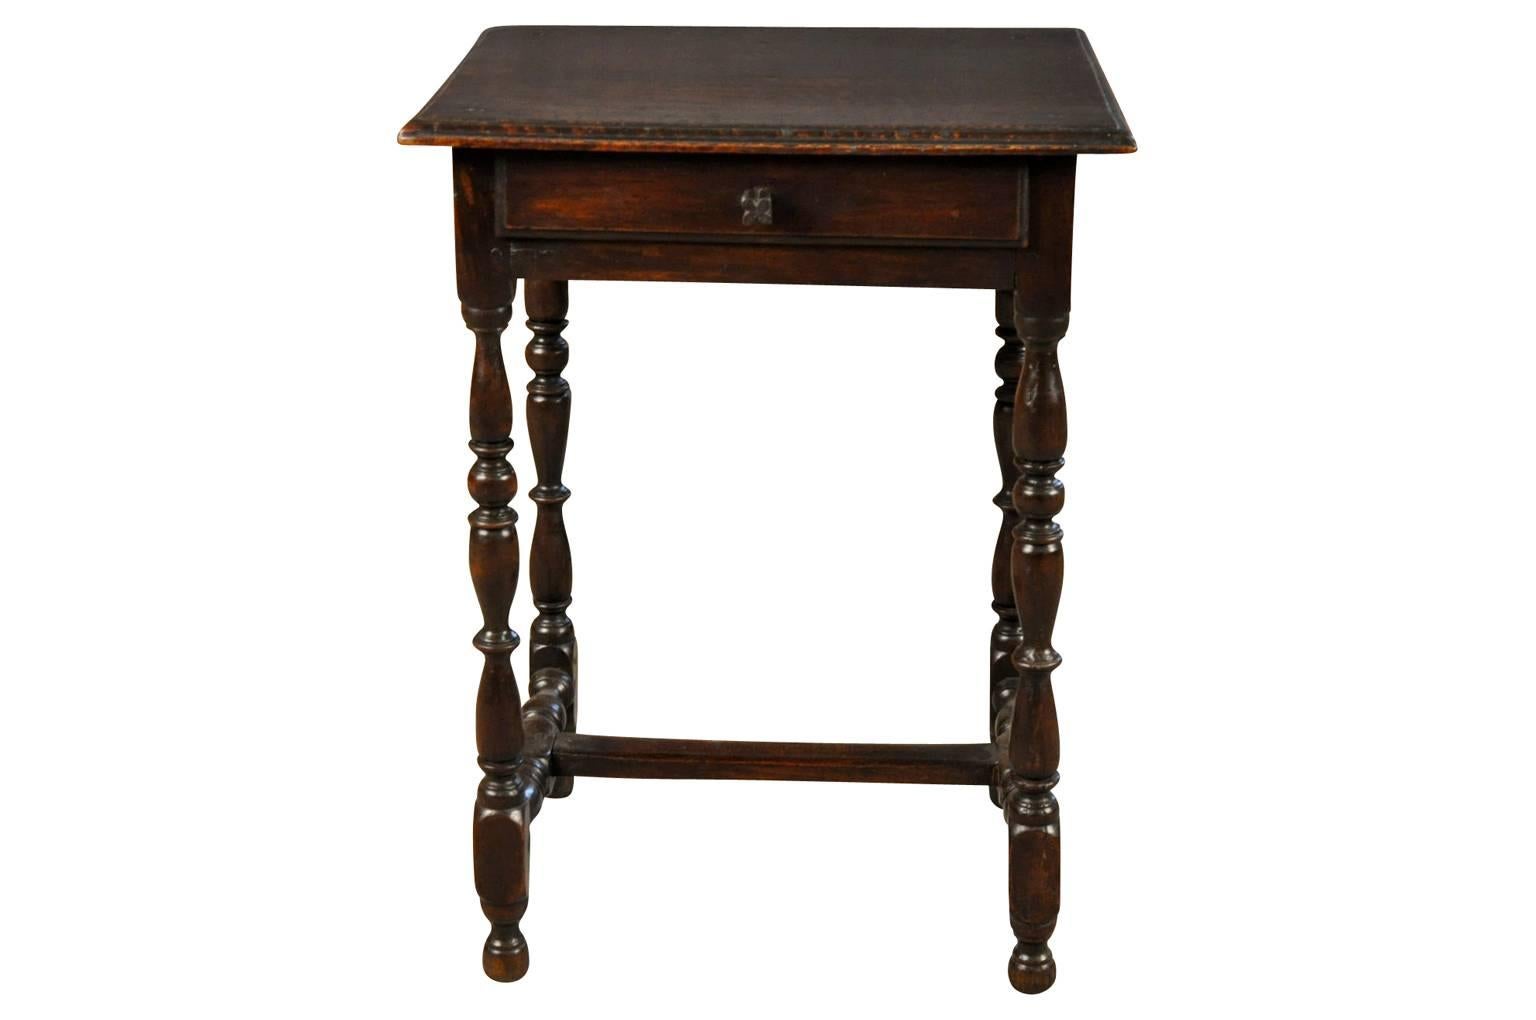 A delightful early 19th century Louis XIII style side table from the south of France. Beautifully constructed from richly stained oak with charming details throughout - a wonderful edge finish to the plateau, a single drawer and handsomely turned